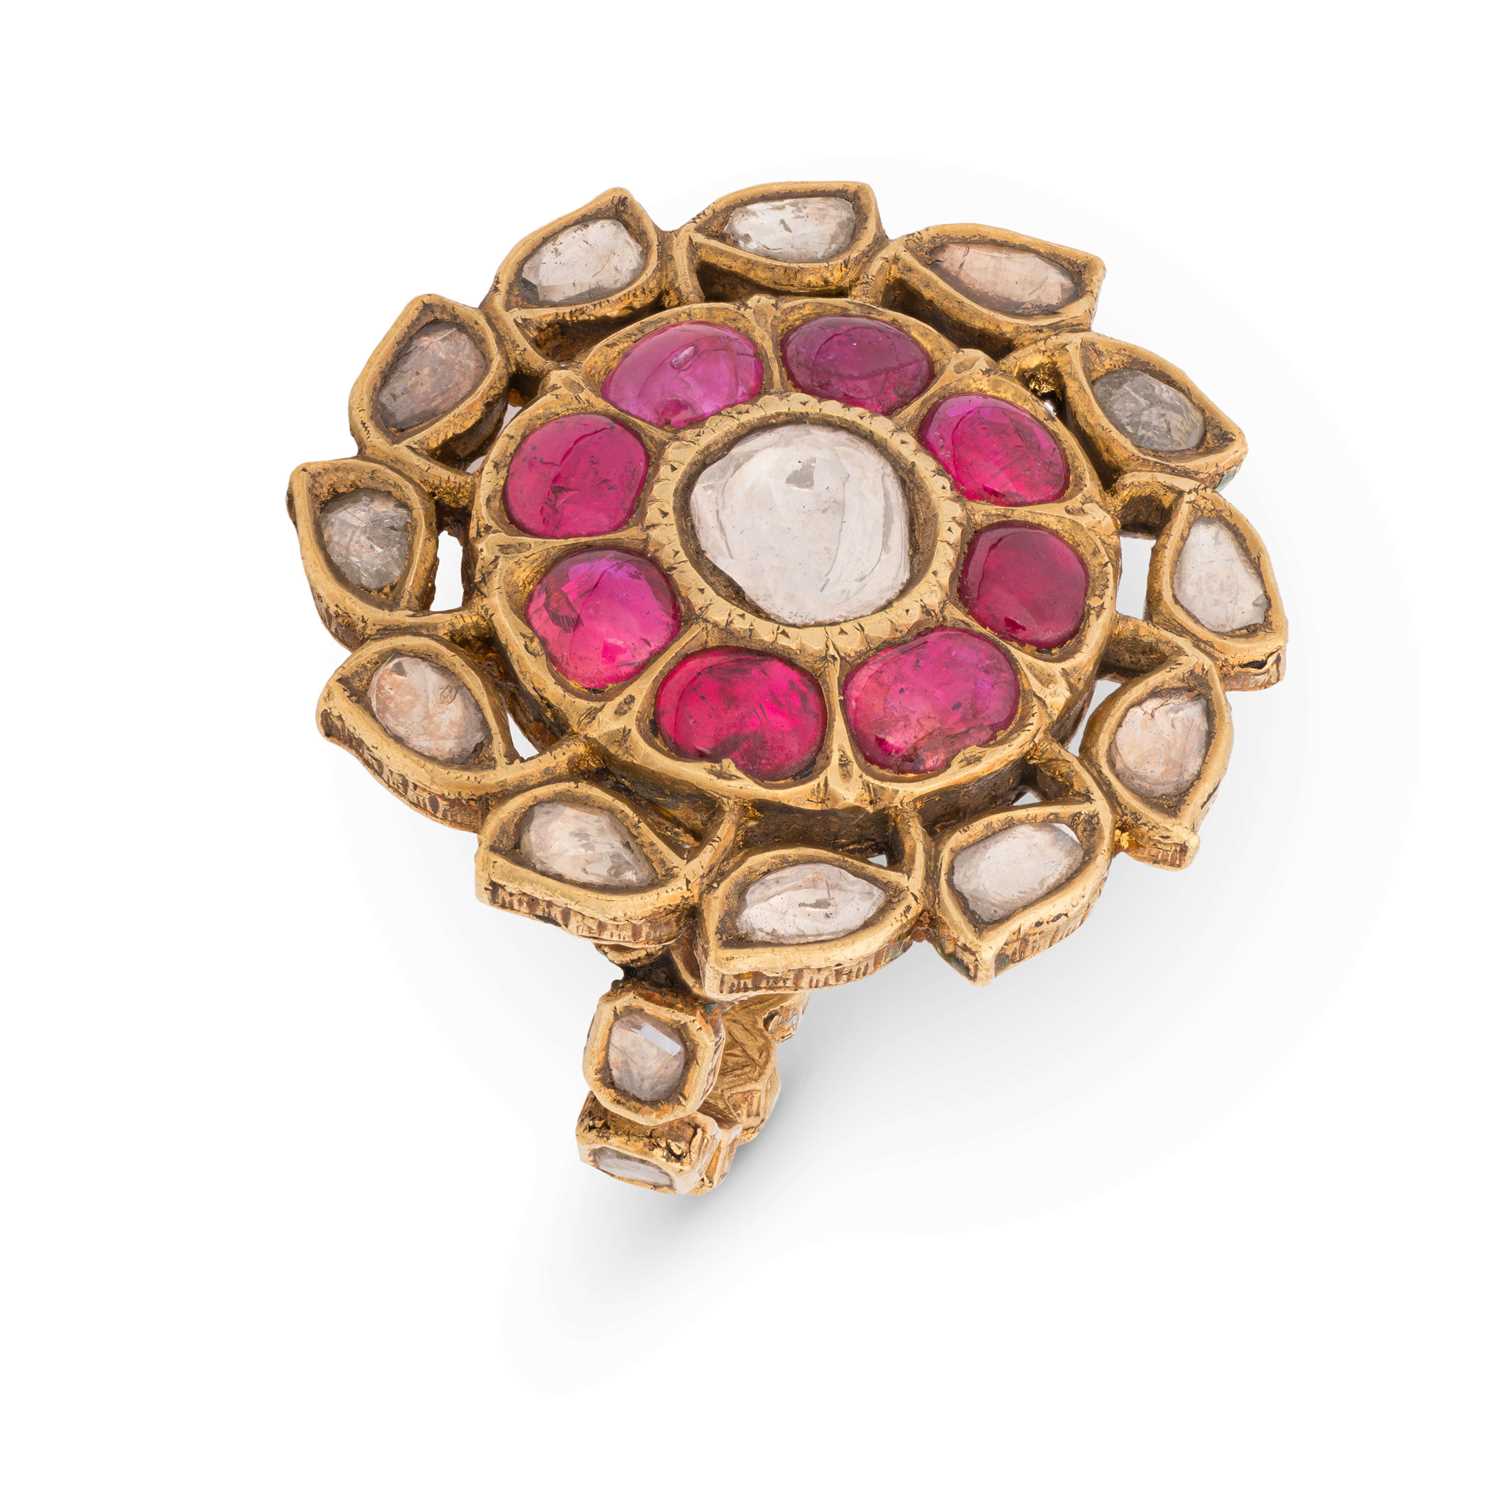 Lot 522 - A 20K Gold, Ruby, and Diamond Mughal Style Ring